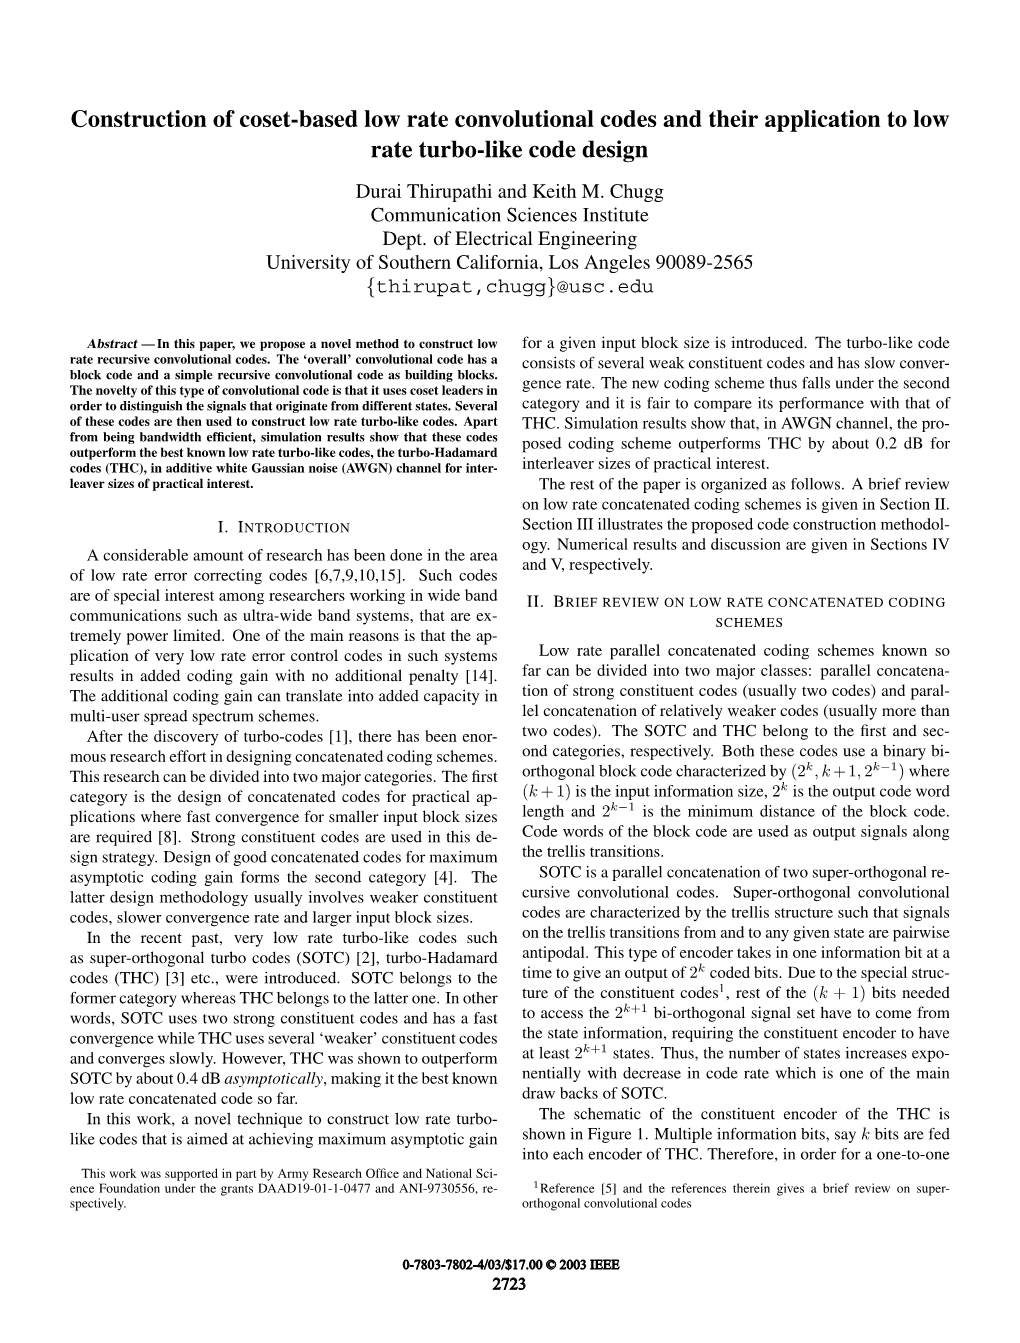 Construction of Coset-Based Low Rate Convolutional Codes and Their Application to Low Rate Turbo-Like Code Design Durai Thirupathi and Keith M